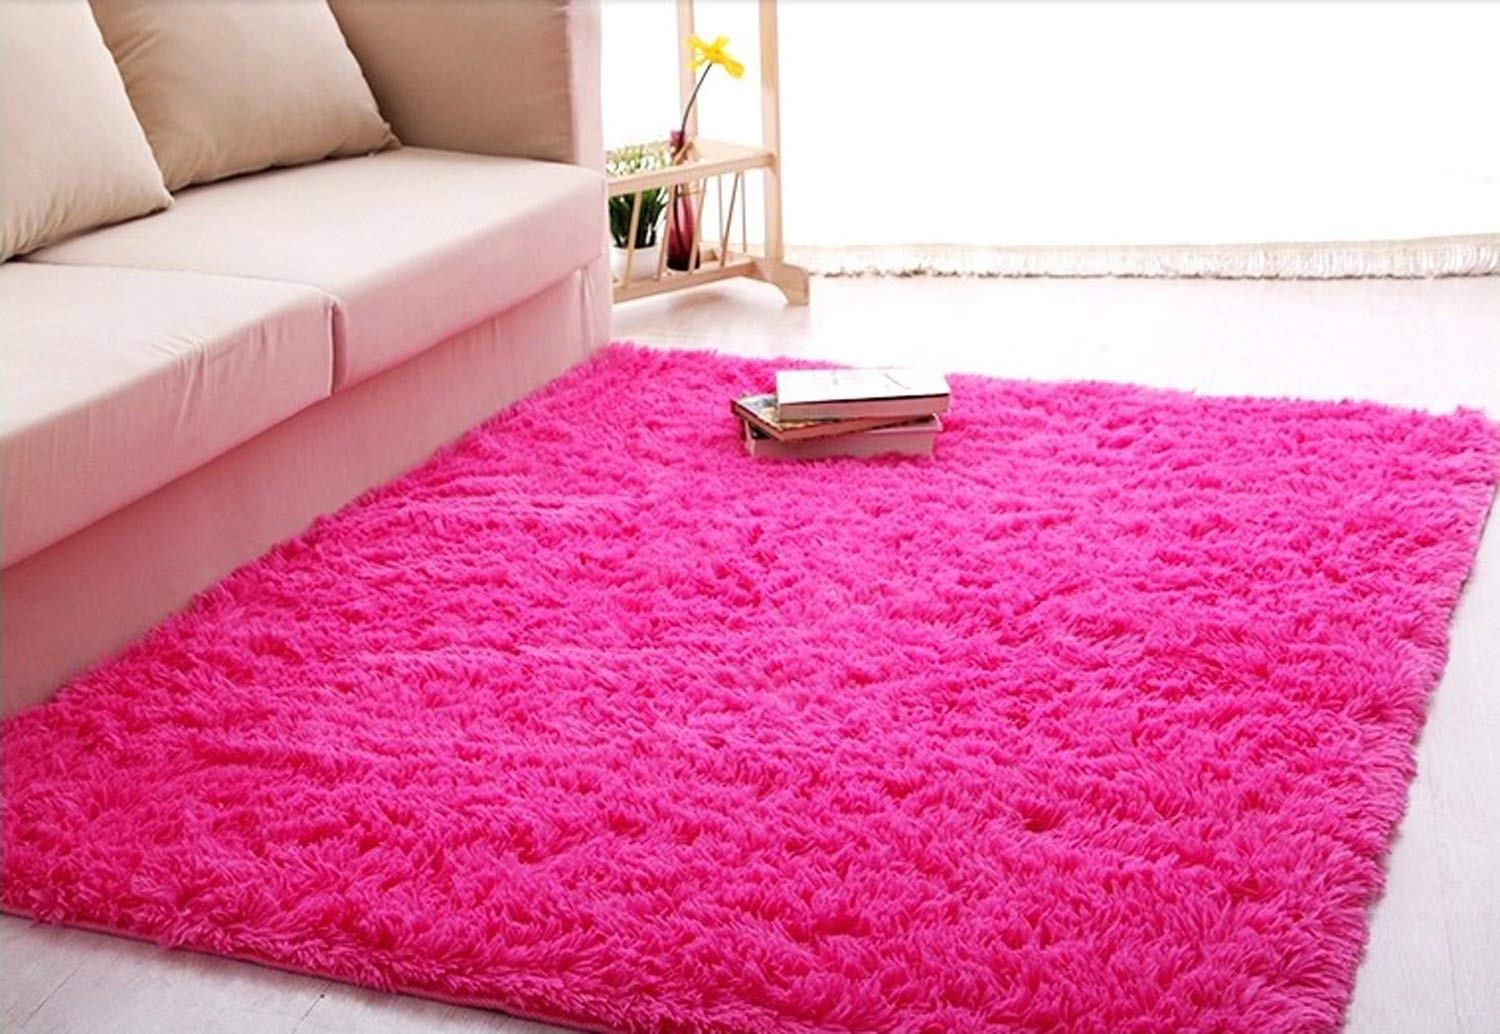 Cute rugs for different areas